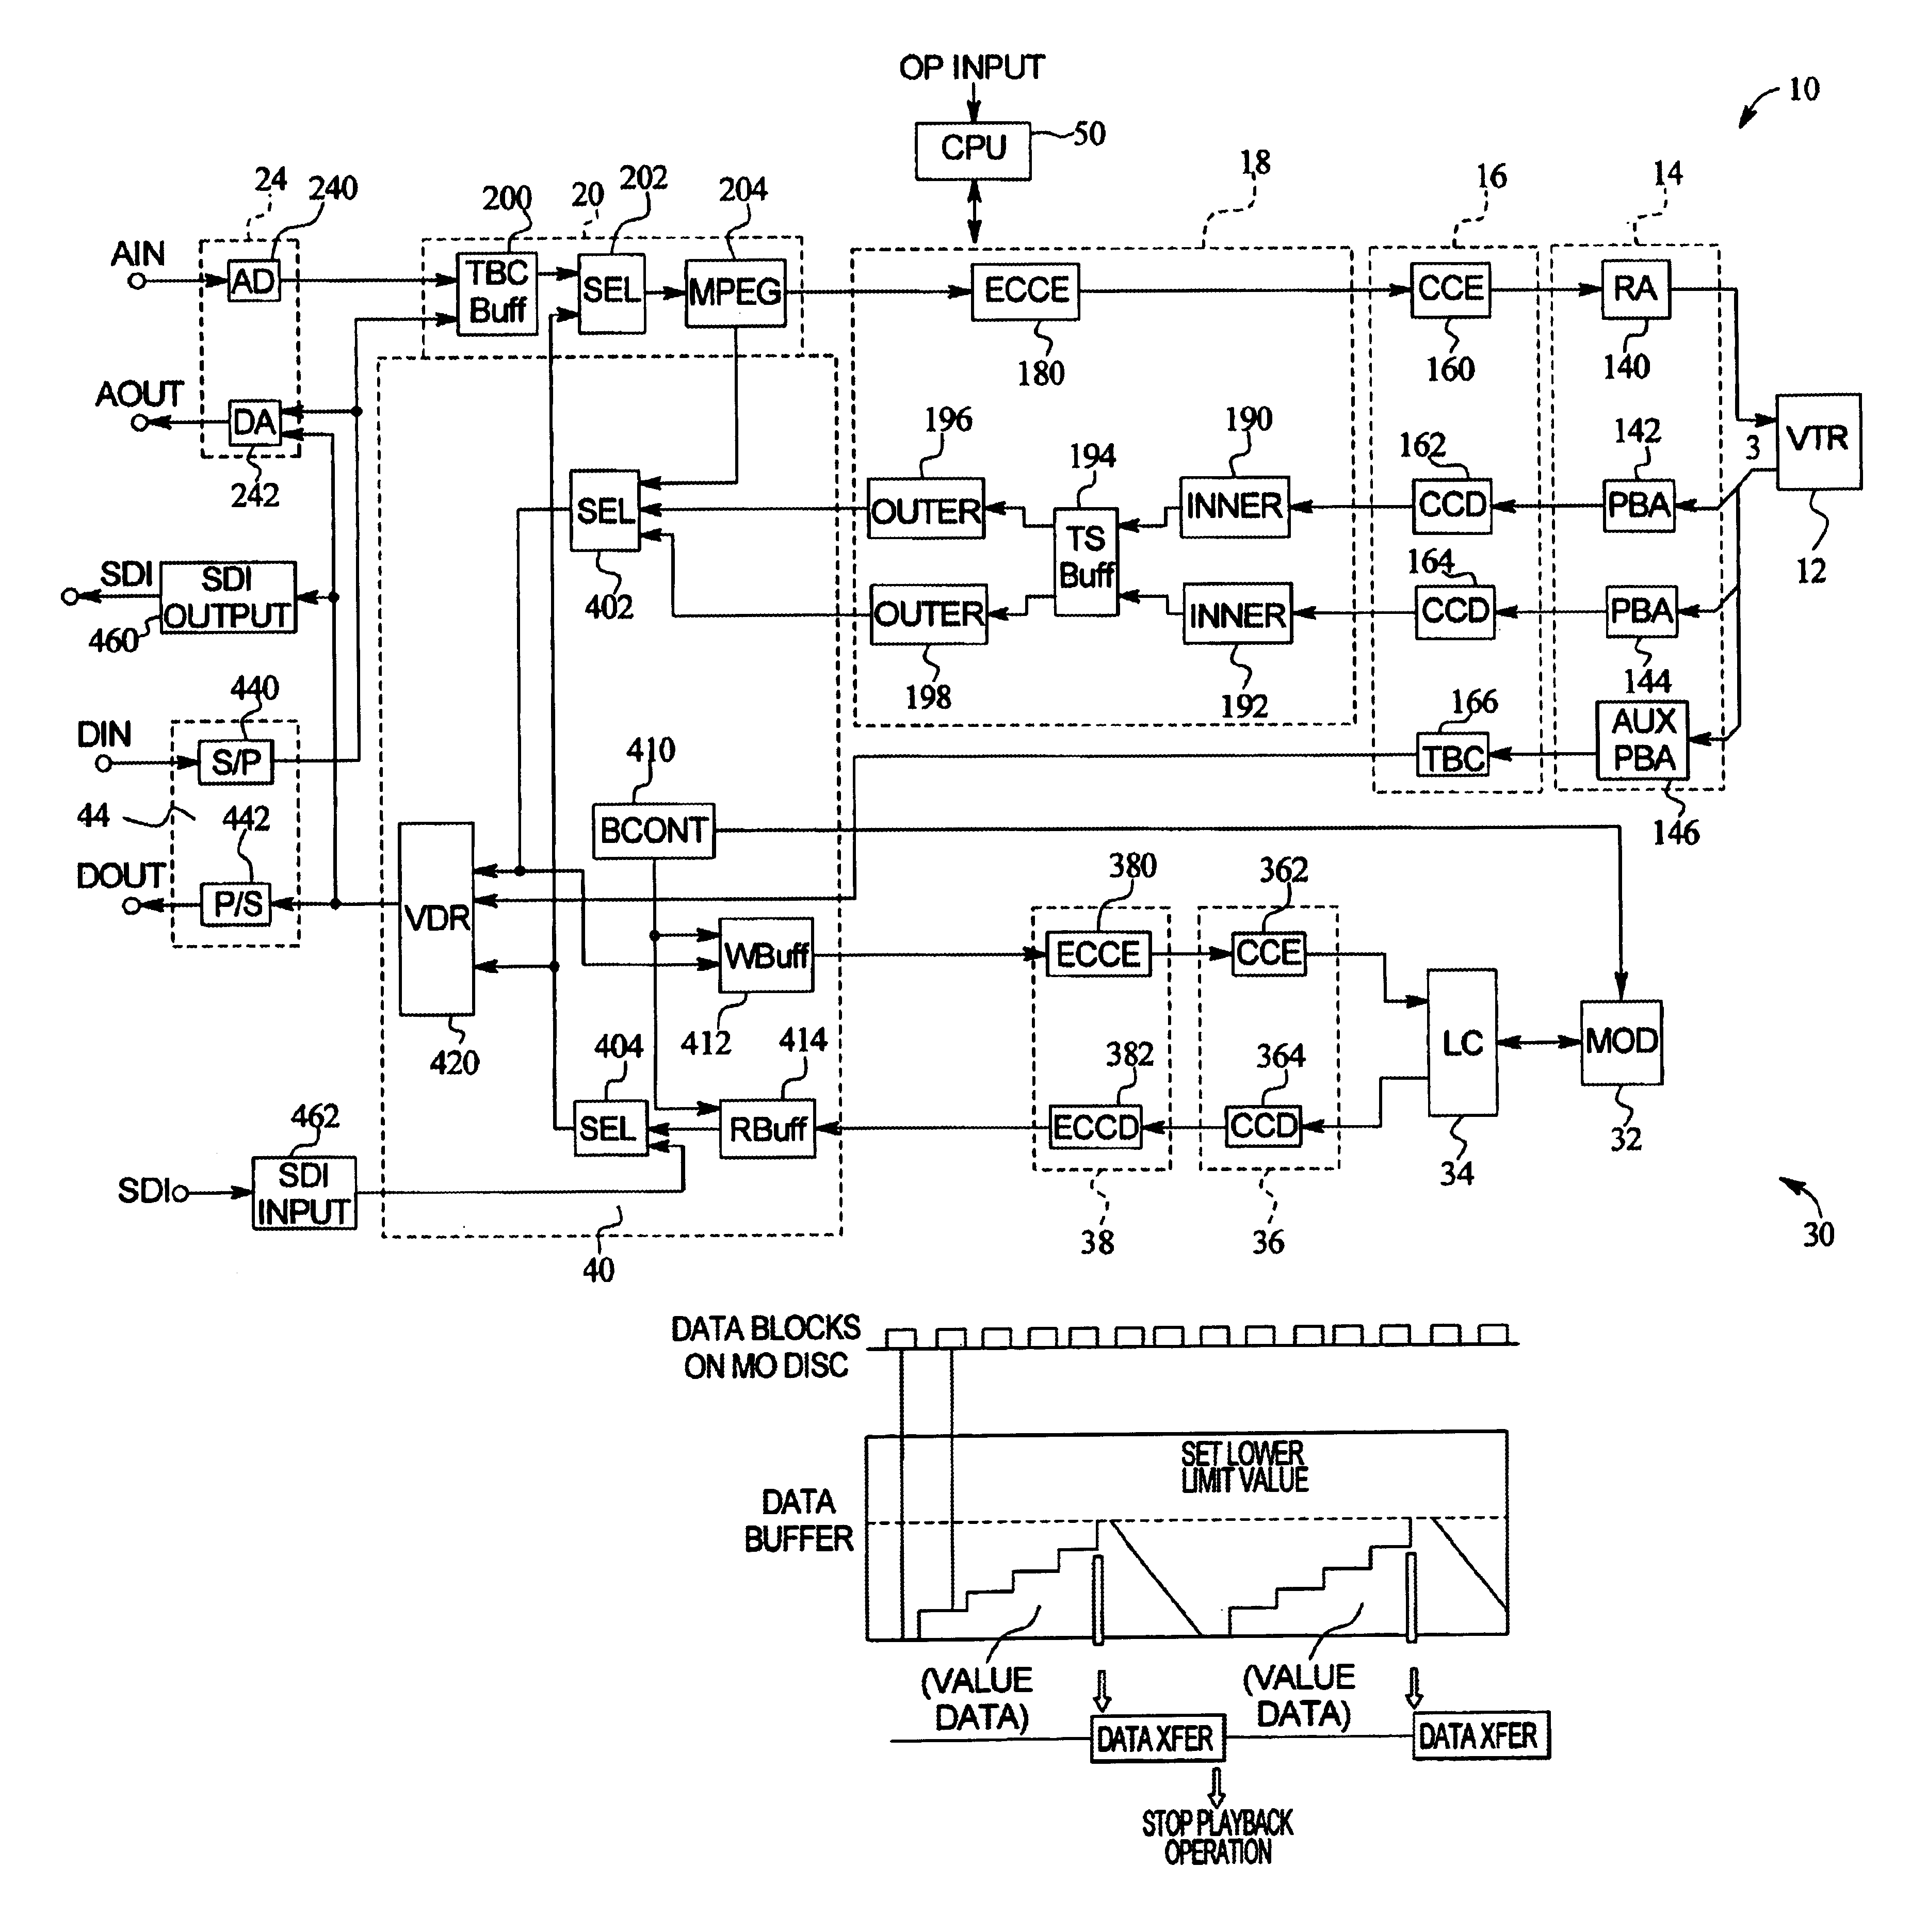 Data recording and reproducing apparatus having a data transferring device for selectively transferring data between multiple data recording and reproducing devices